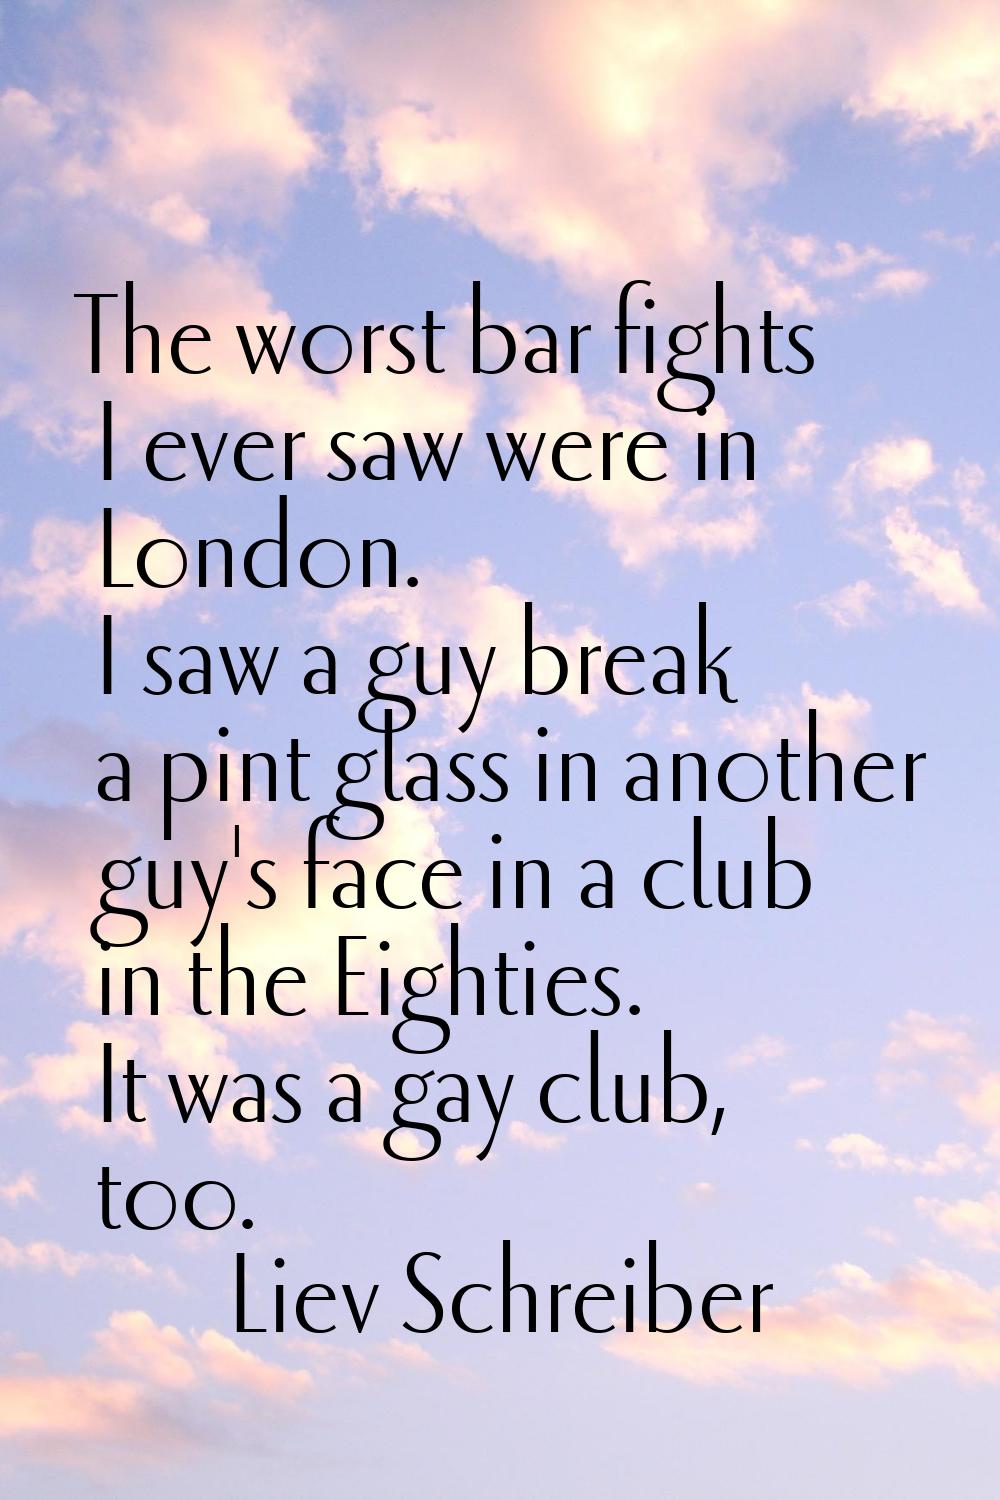 The worst bar fights I ever saw were in London. I saw a guy break a pint glass in another guy's fac